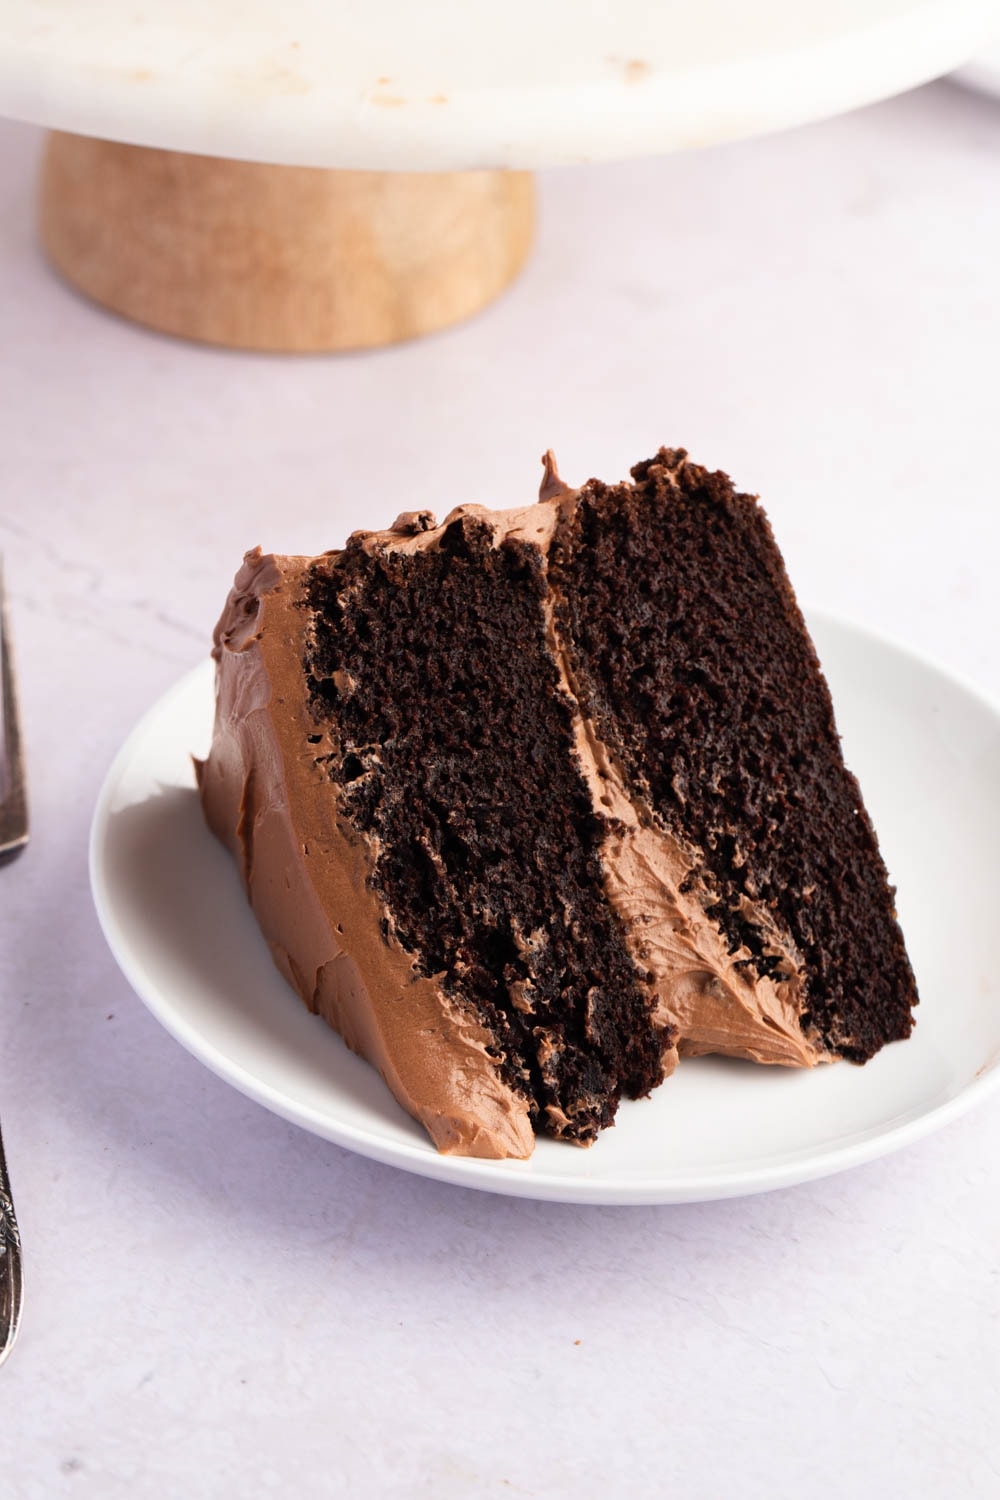 Try Ina Garten's Hack for Serving Restaurant-Style Cake | The Kitchn